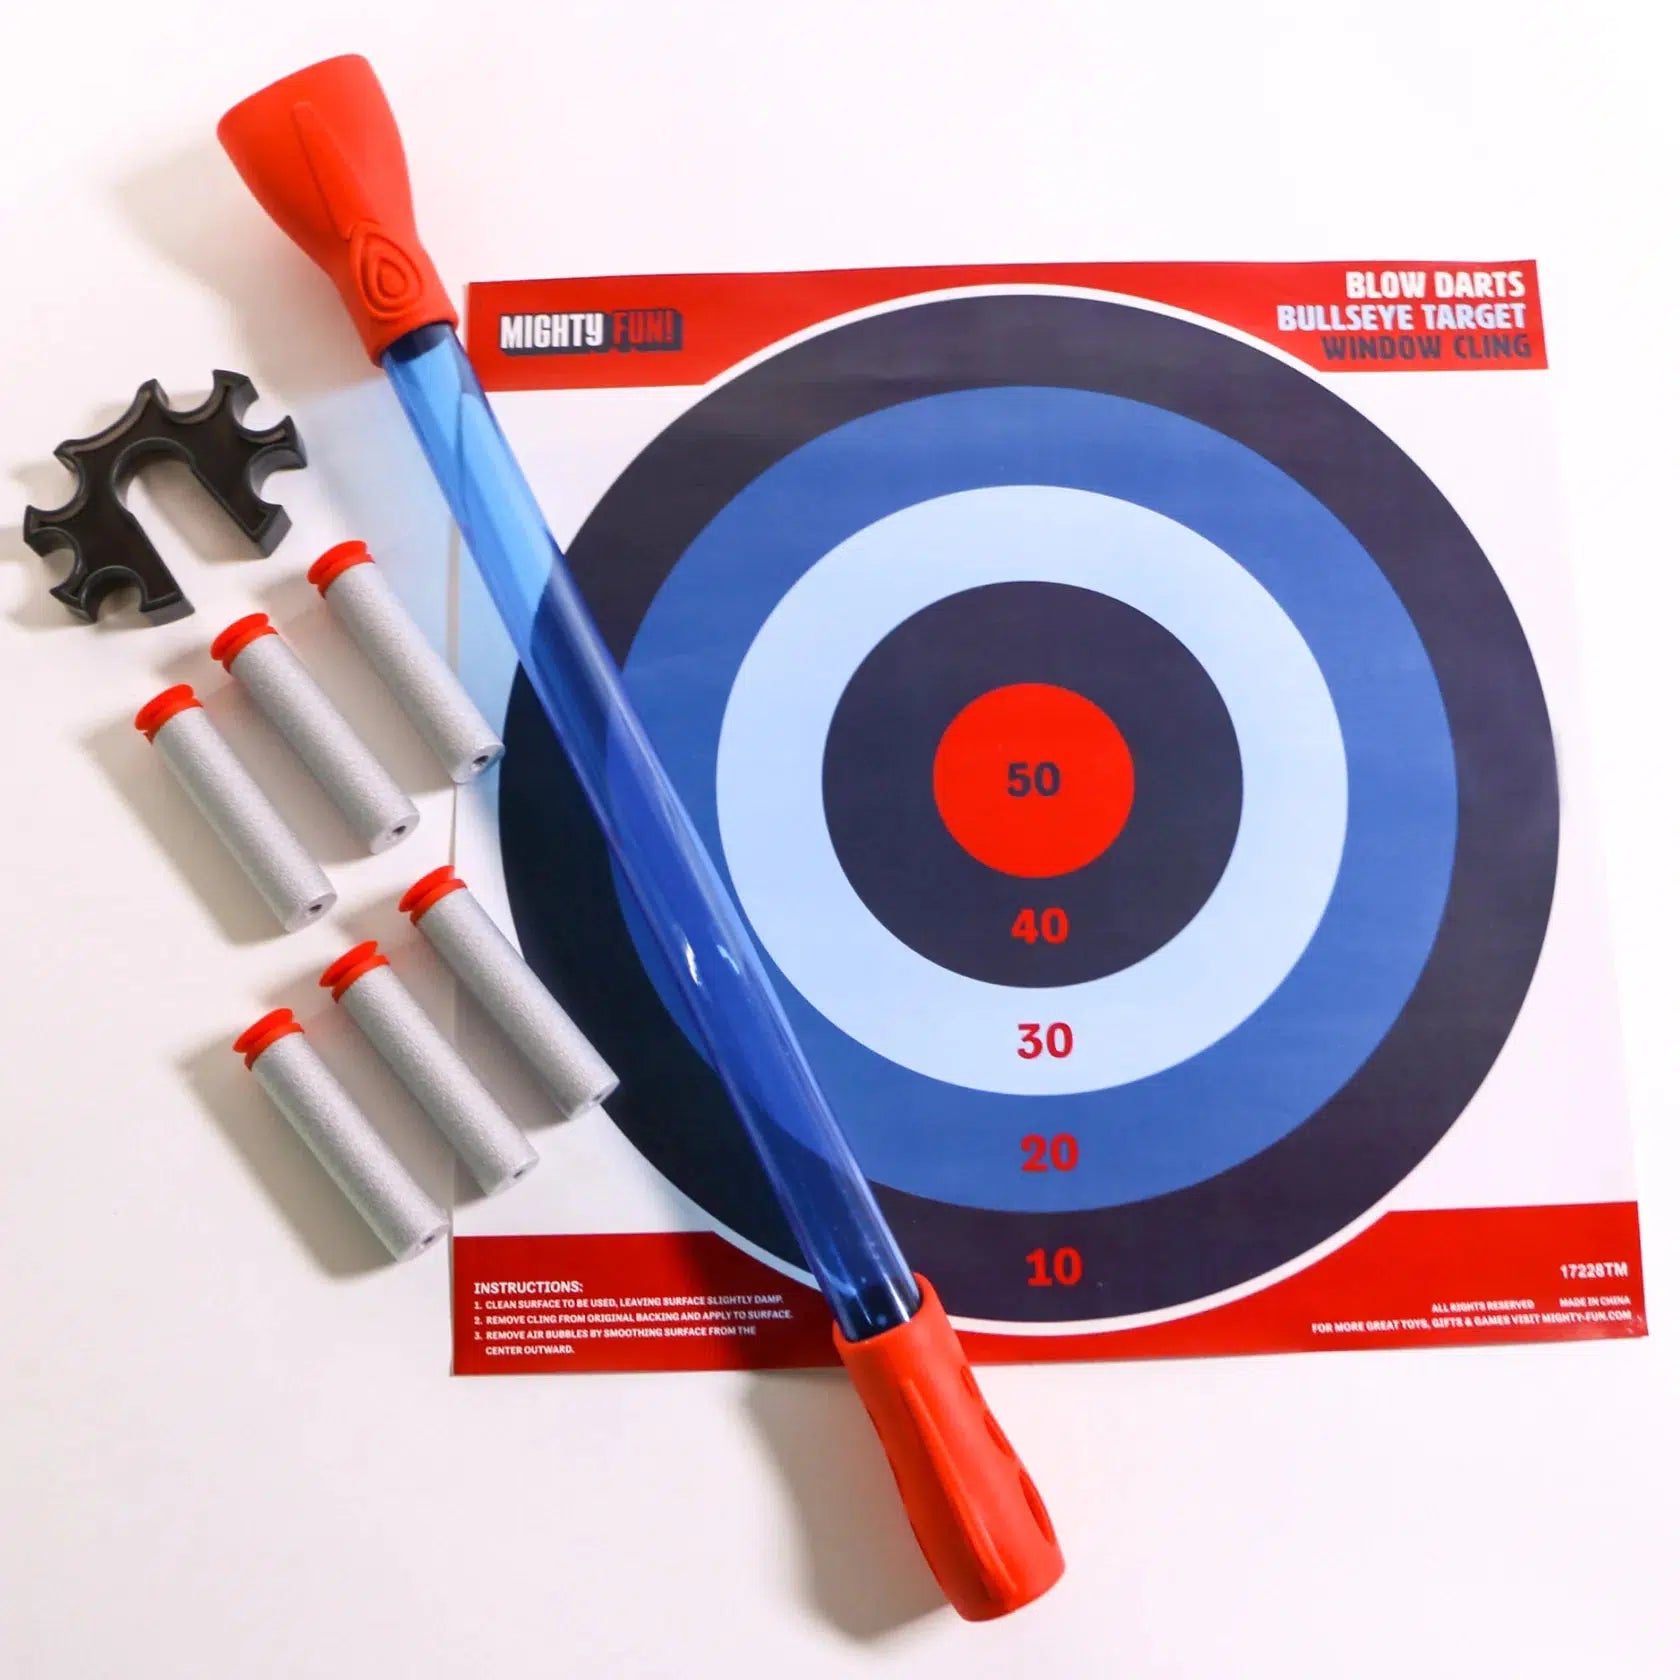 Front view of Blow Darts Target Set both in the box and out.